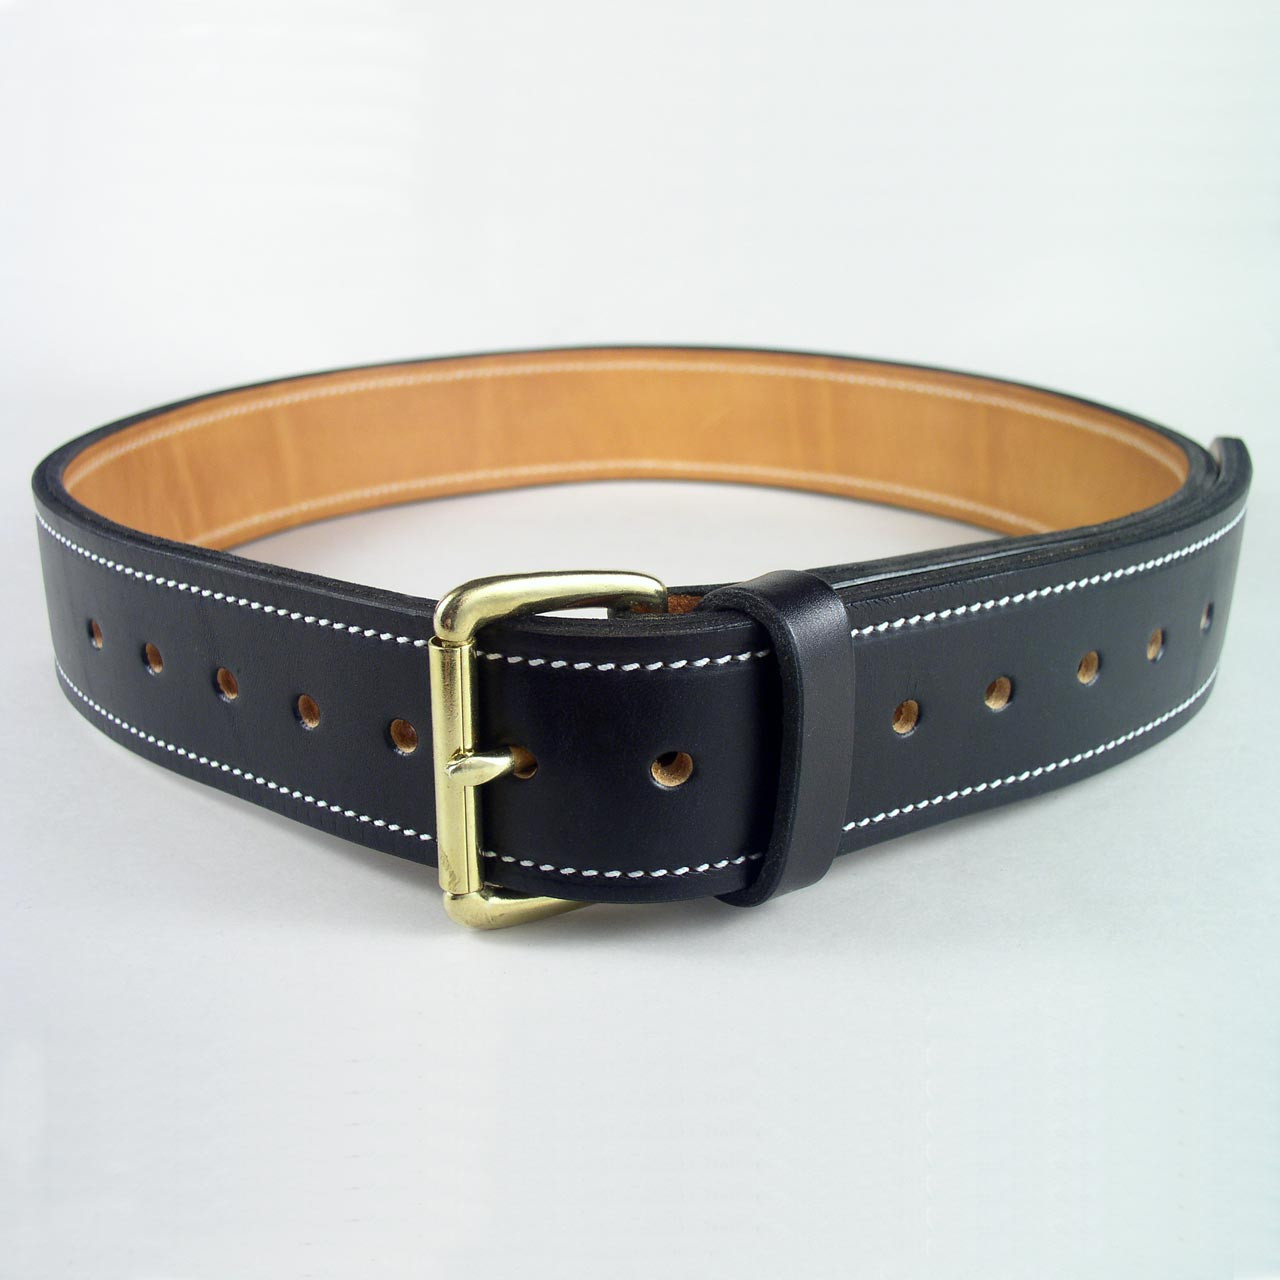 2 to 2-3/4 Heavy Duty Tapered Width Leather Belt